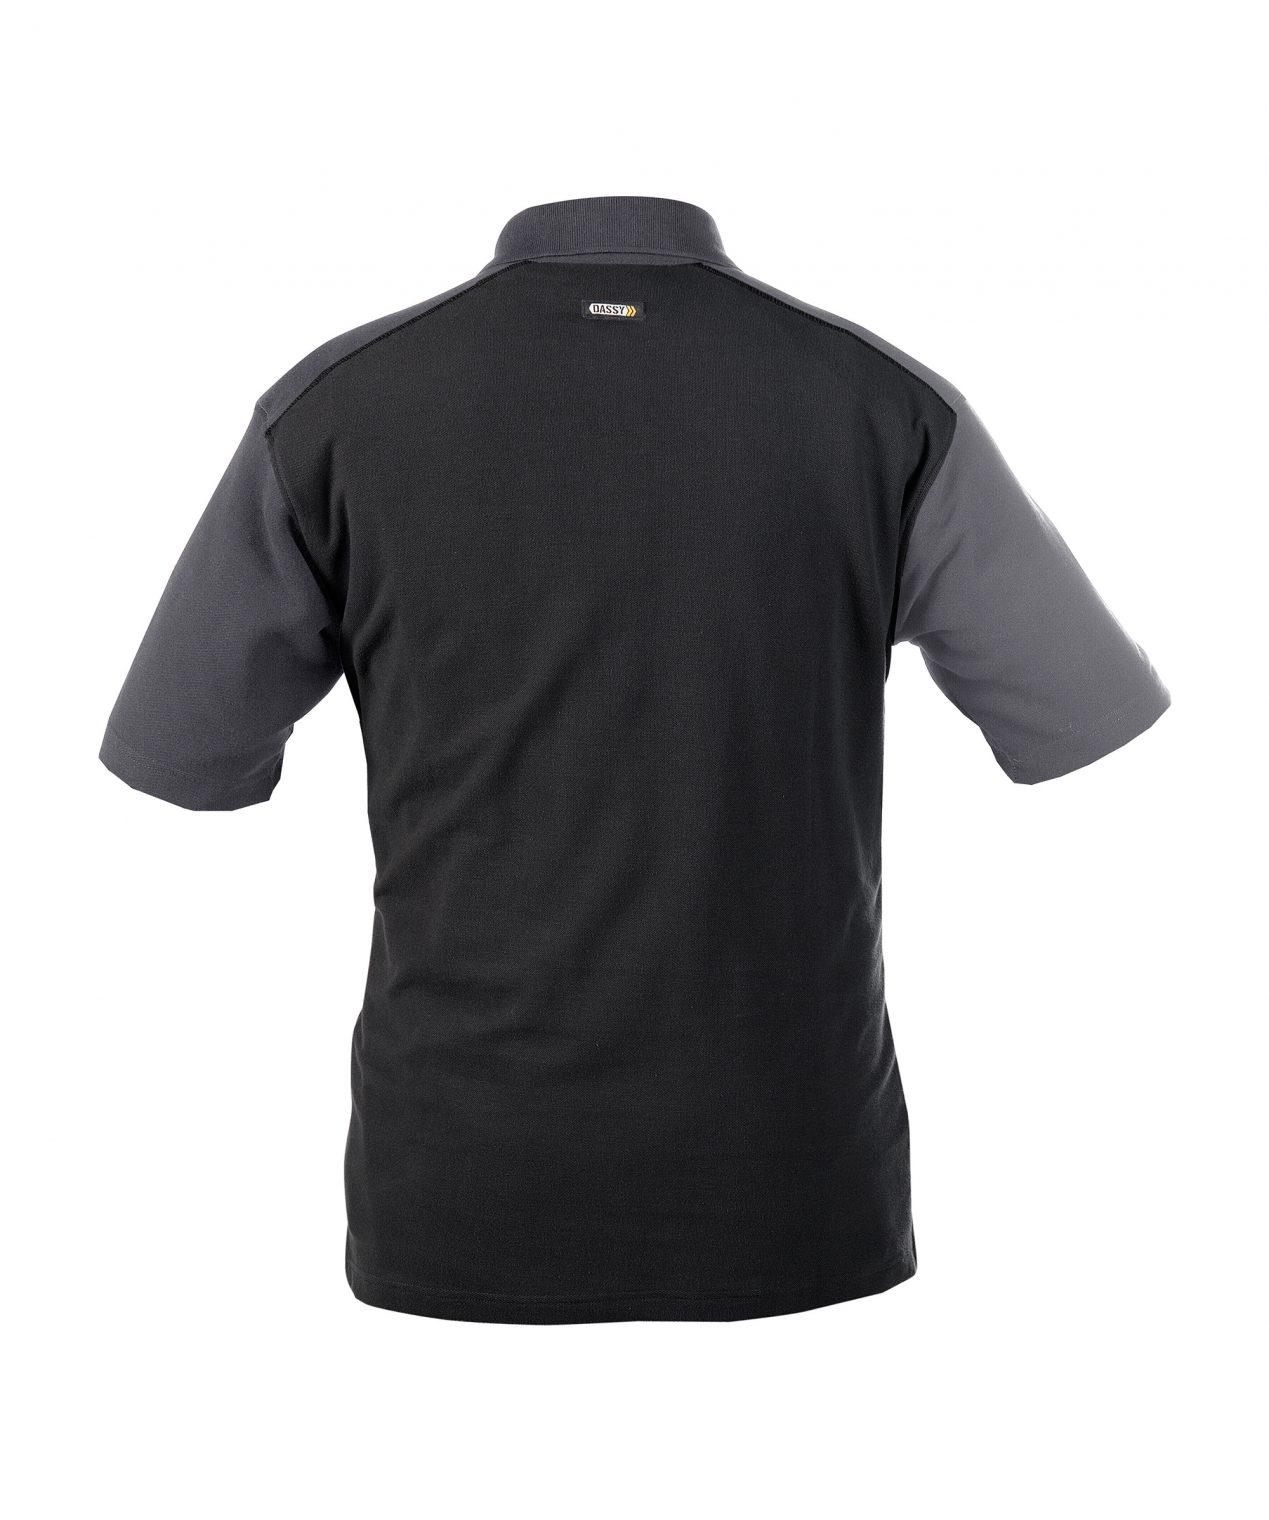 cesar two tone polo shirt black cement grey back